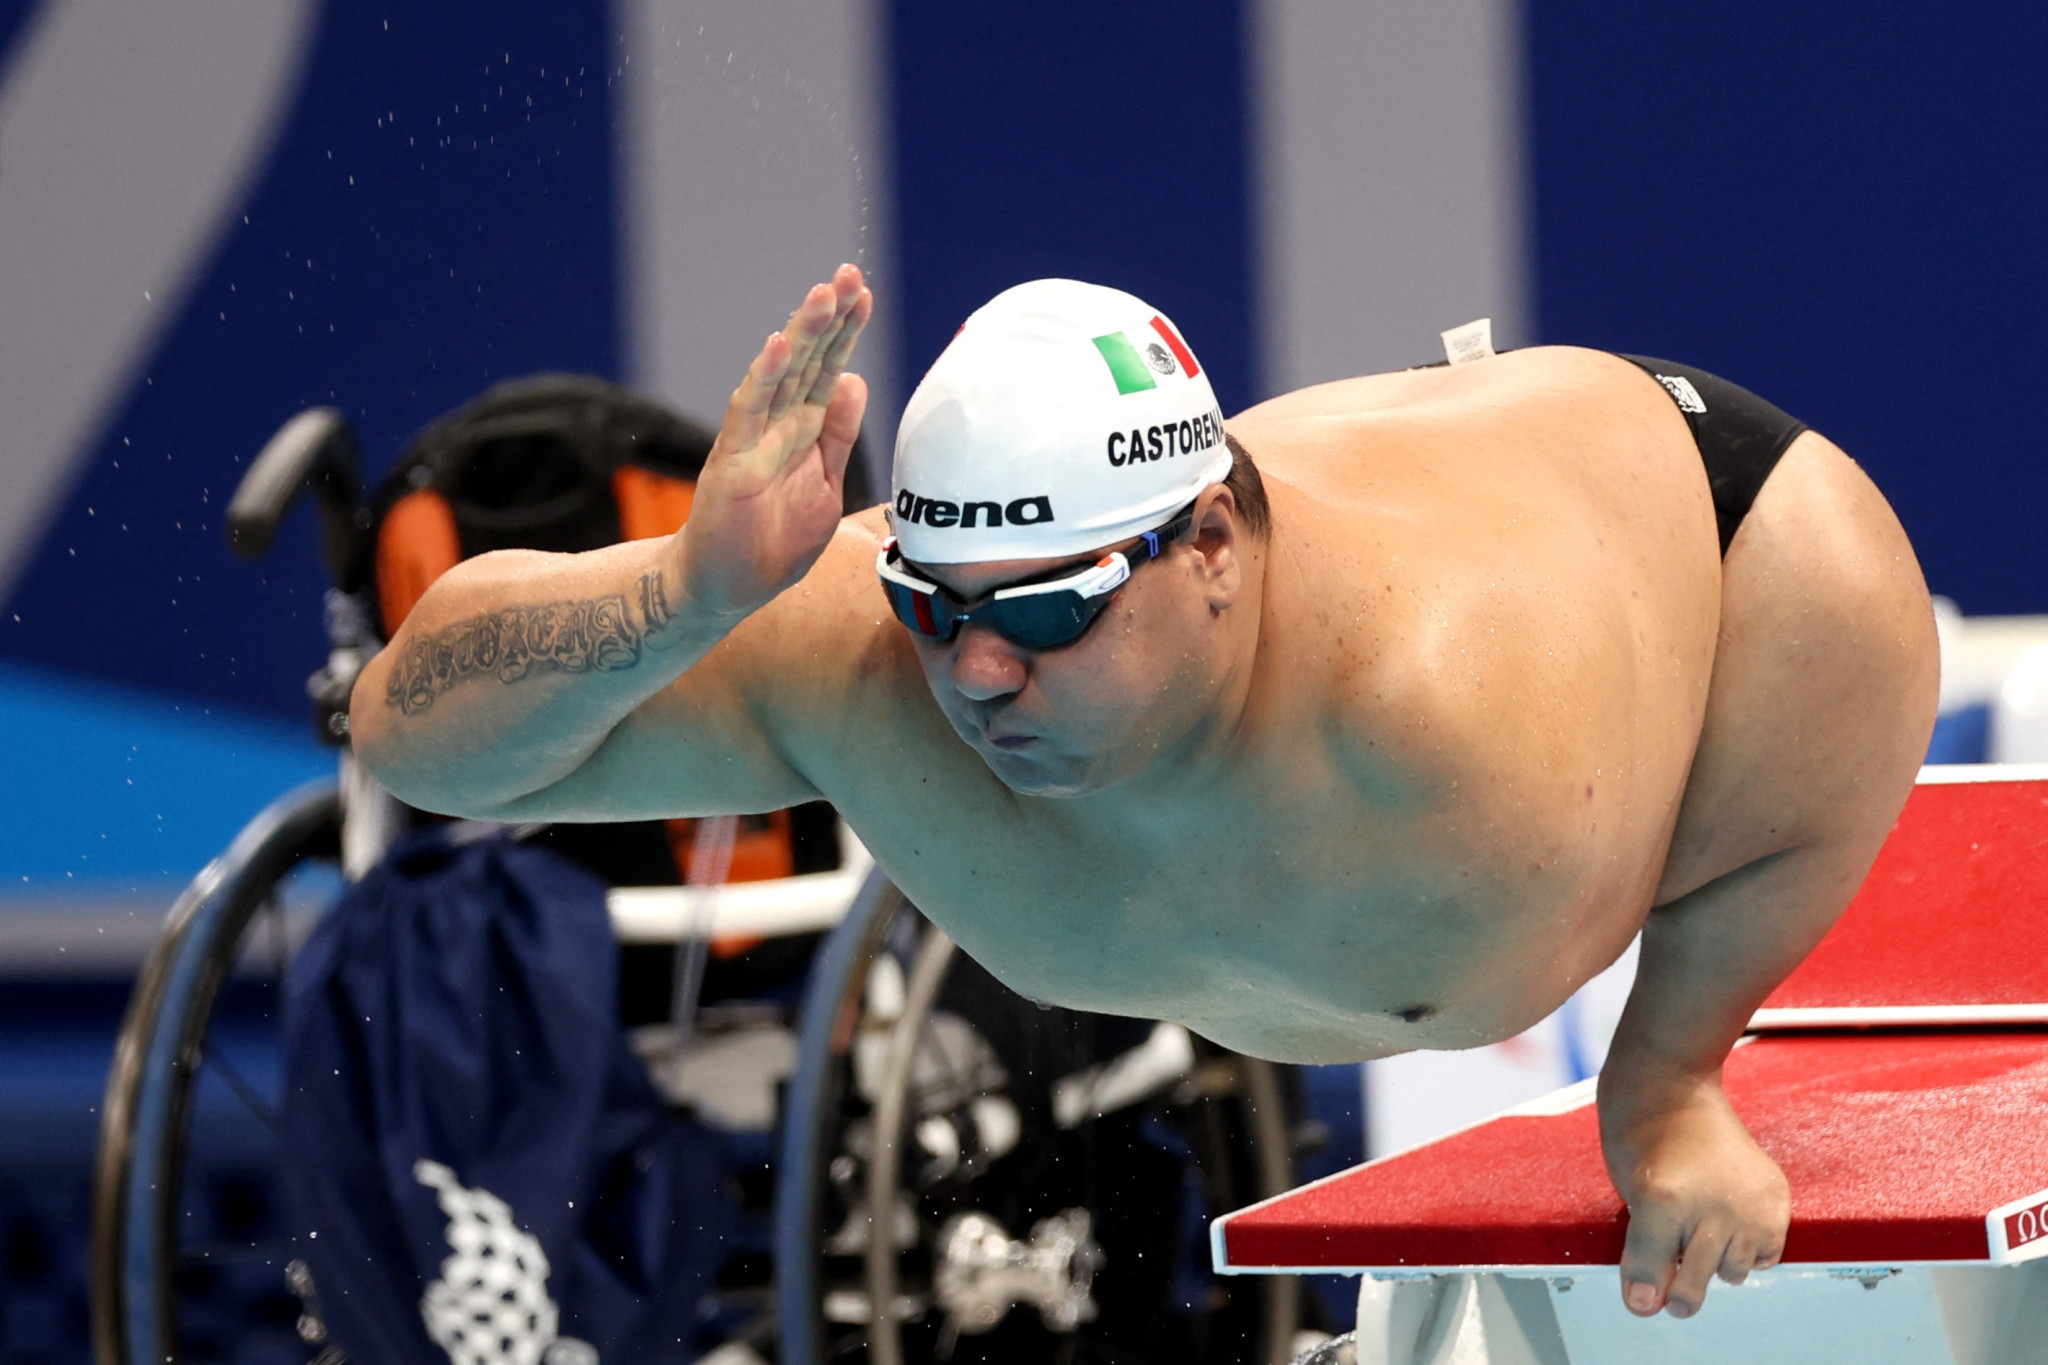 Mexico's Arnulfo Castorena proved too strong in the men's 50m breaststroke SB2 final ©Getty Images